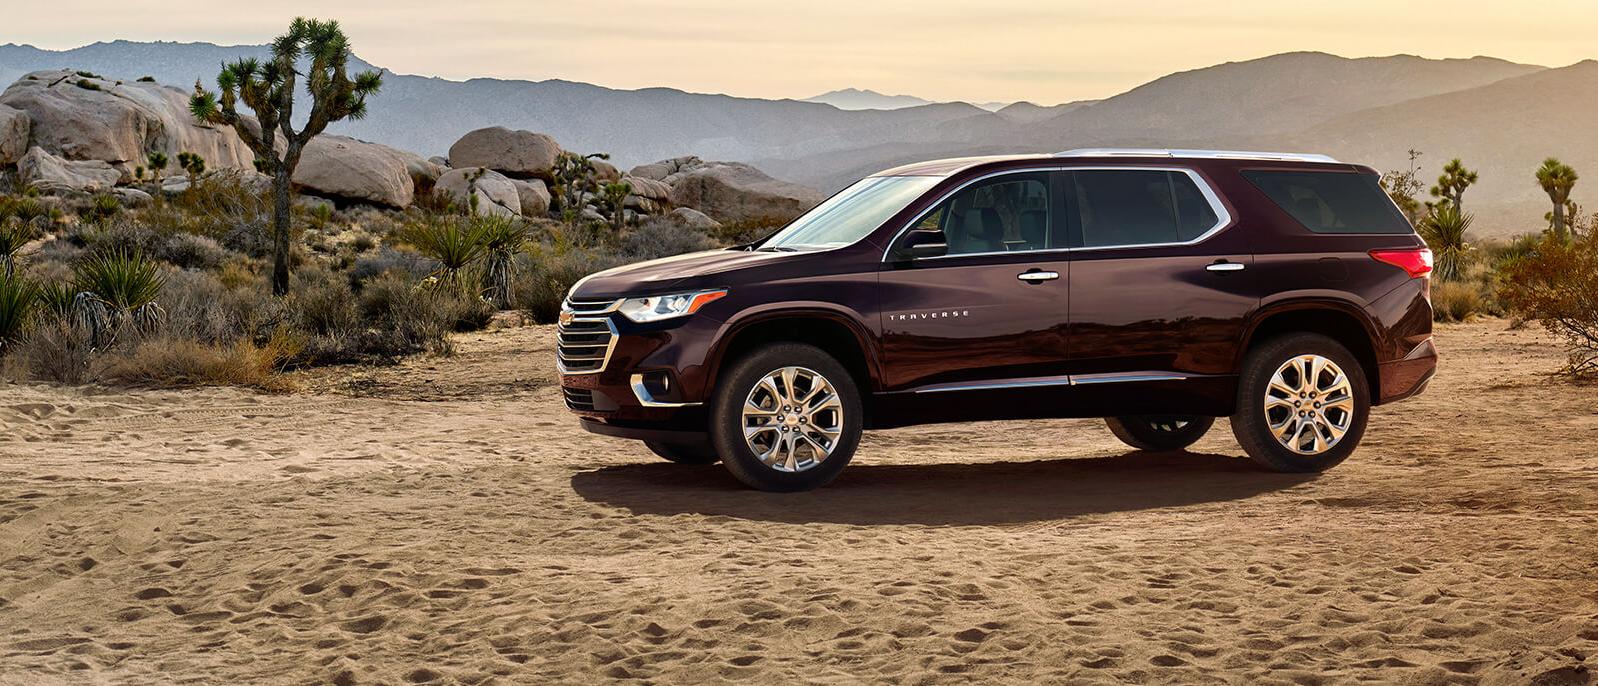 2021 Chevy Traverse parked on a ground.